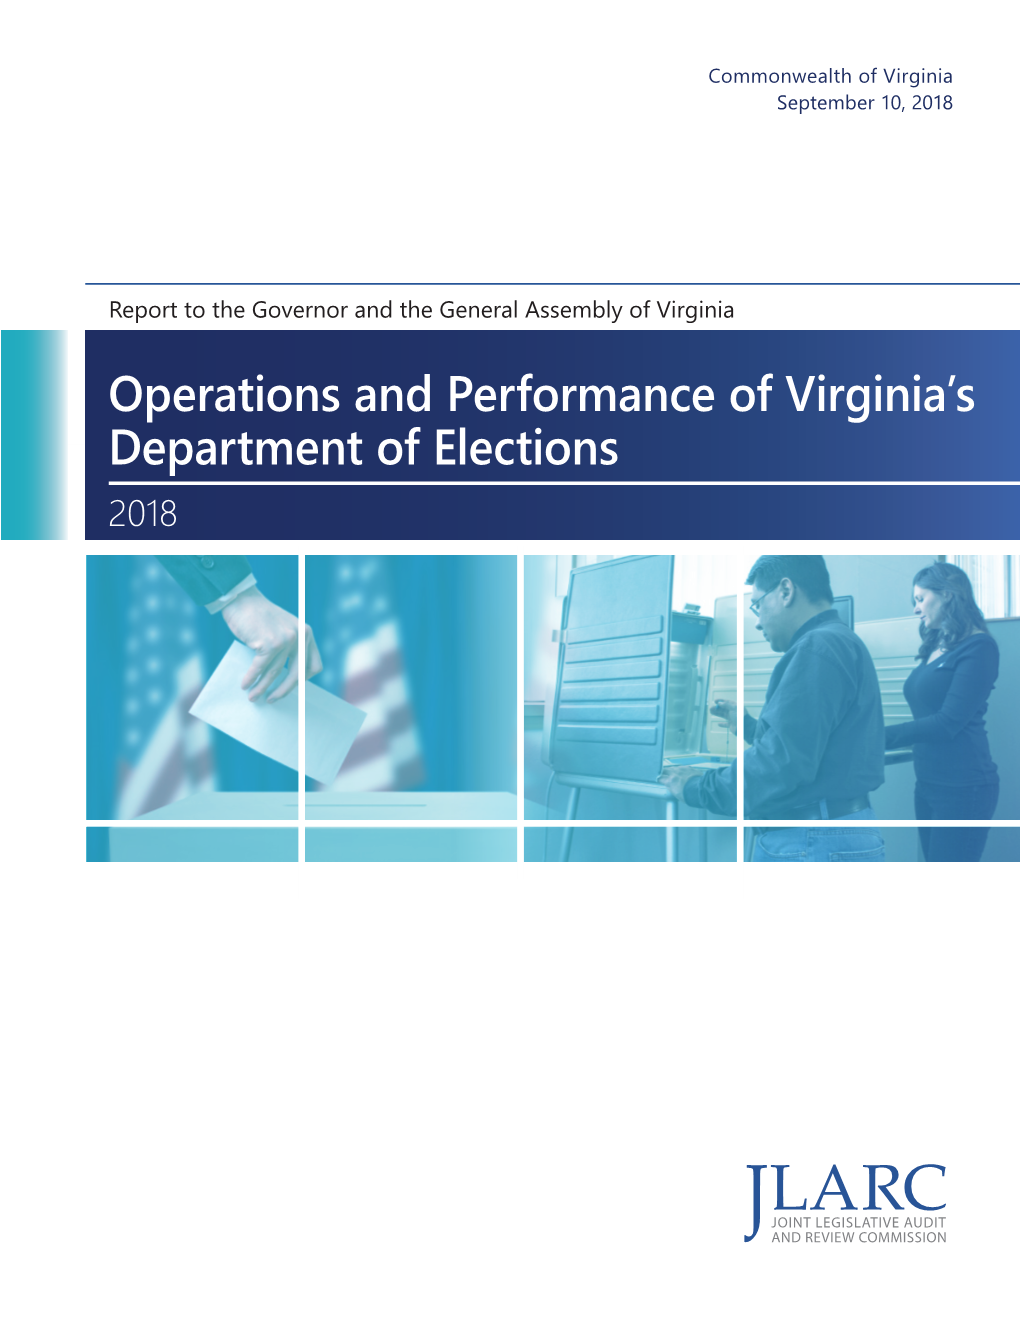 Operations and Performance of Virginia's Department of Elections